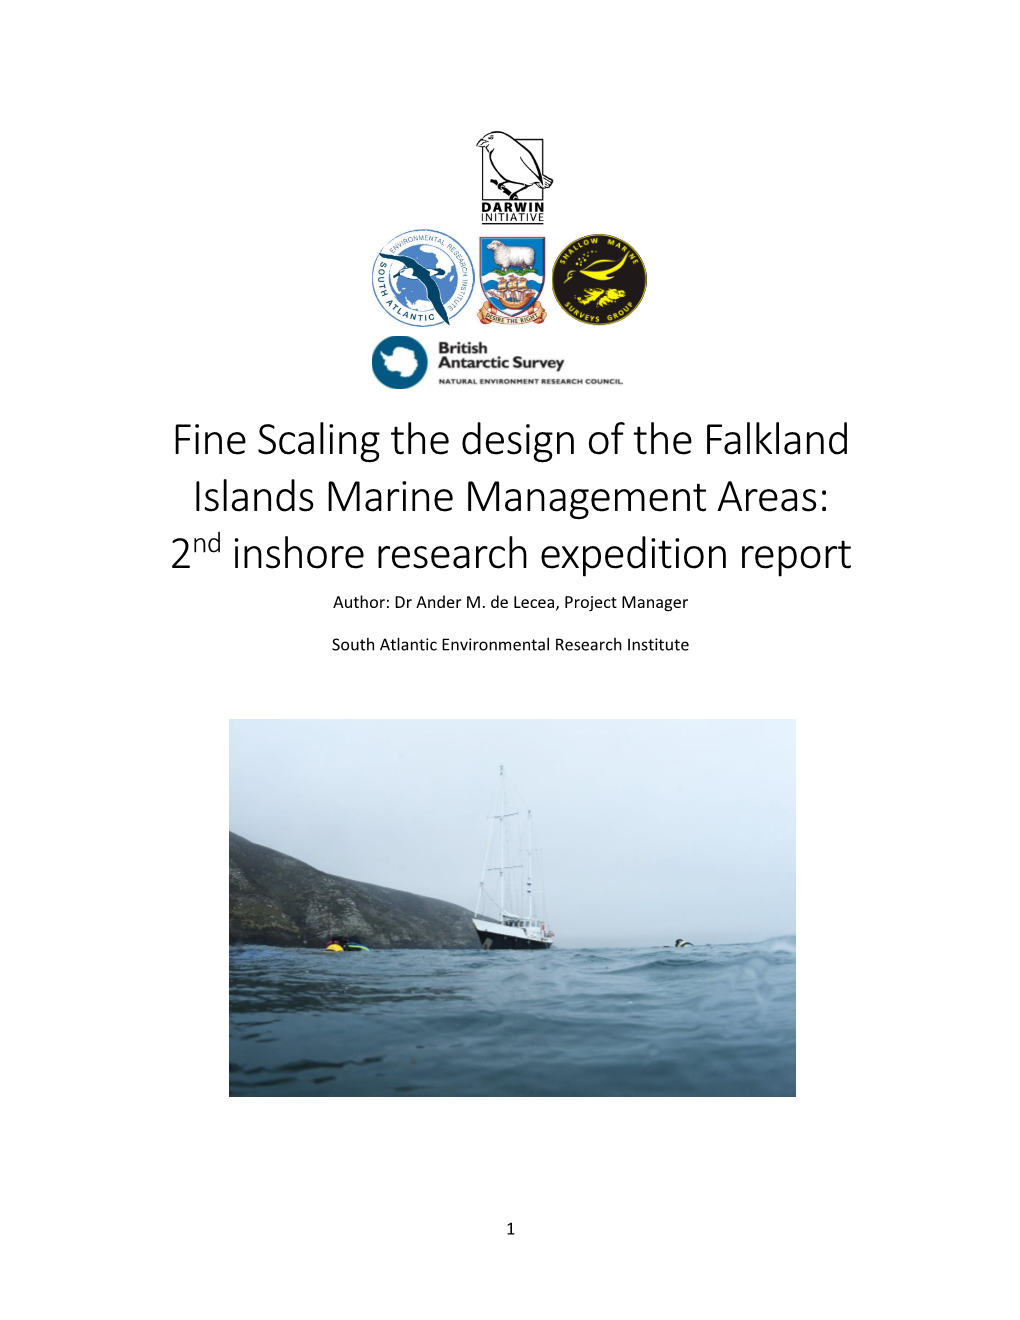 Fine Scaling the Design of the Falkland Islands Marine Management Areas: 2Nd Inshore Research Expedition Report Author: Dr Ander M